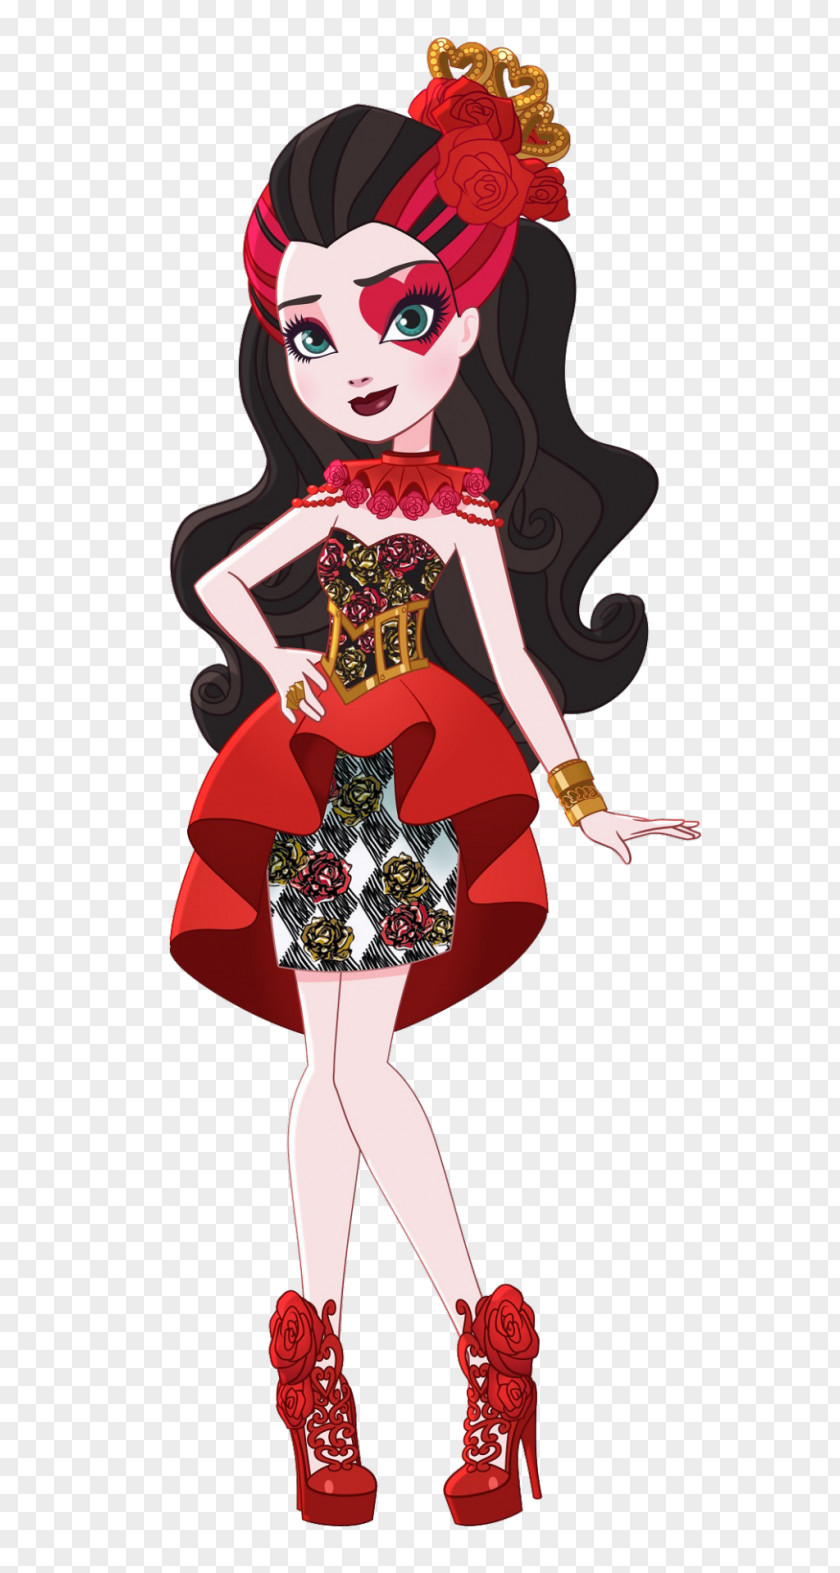 Queen Of Hearts Ever After High Doll Alice's Adventures In Wonderland Monster PNG